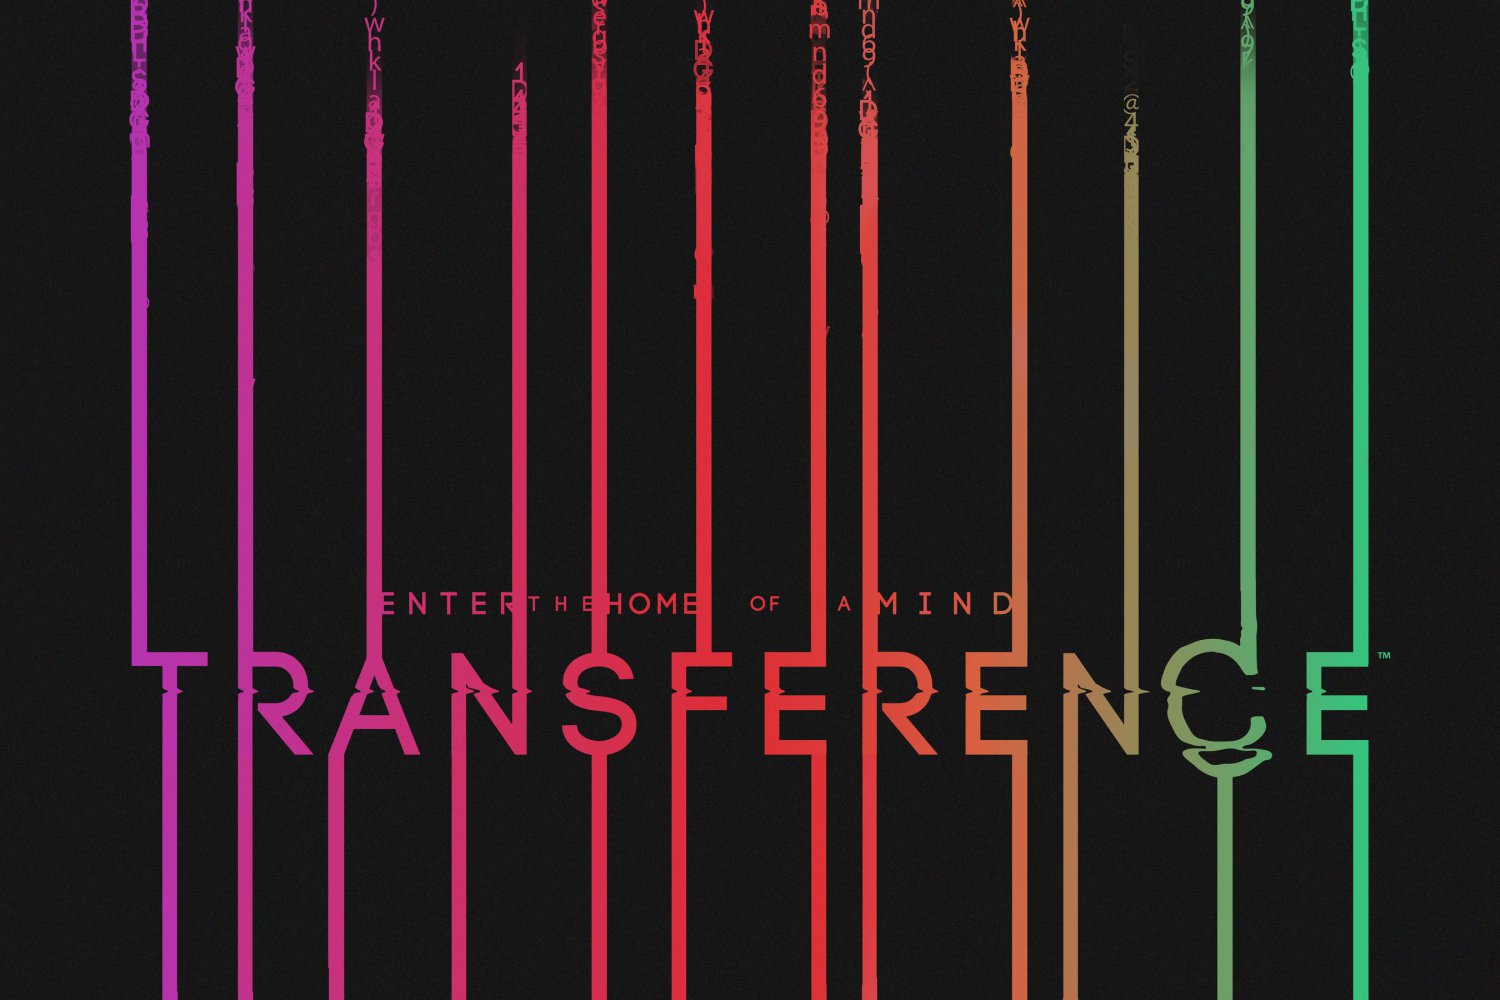 Transference  13"x19" (32cm/49cm) Polyester Fabric Poster